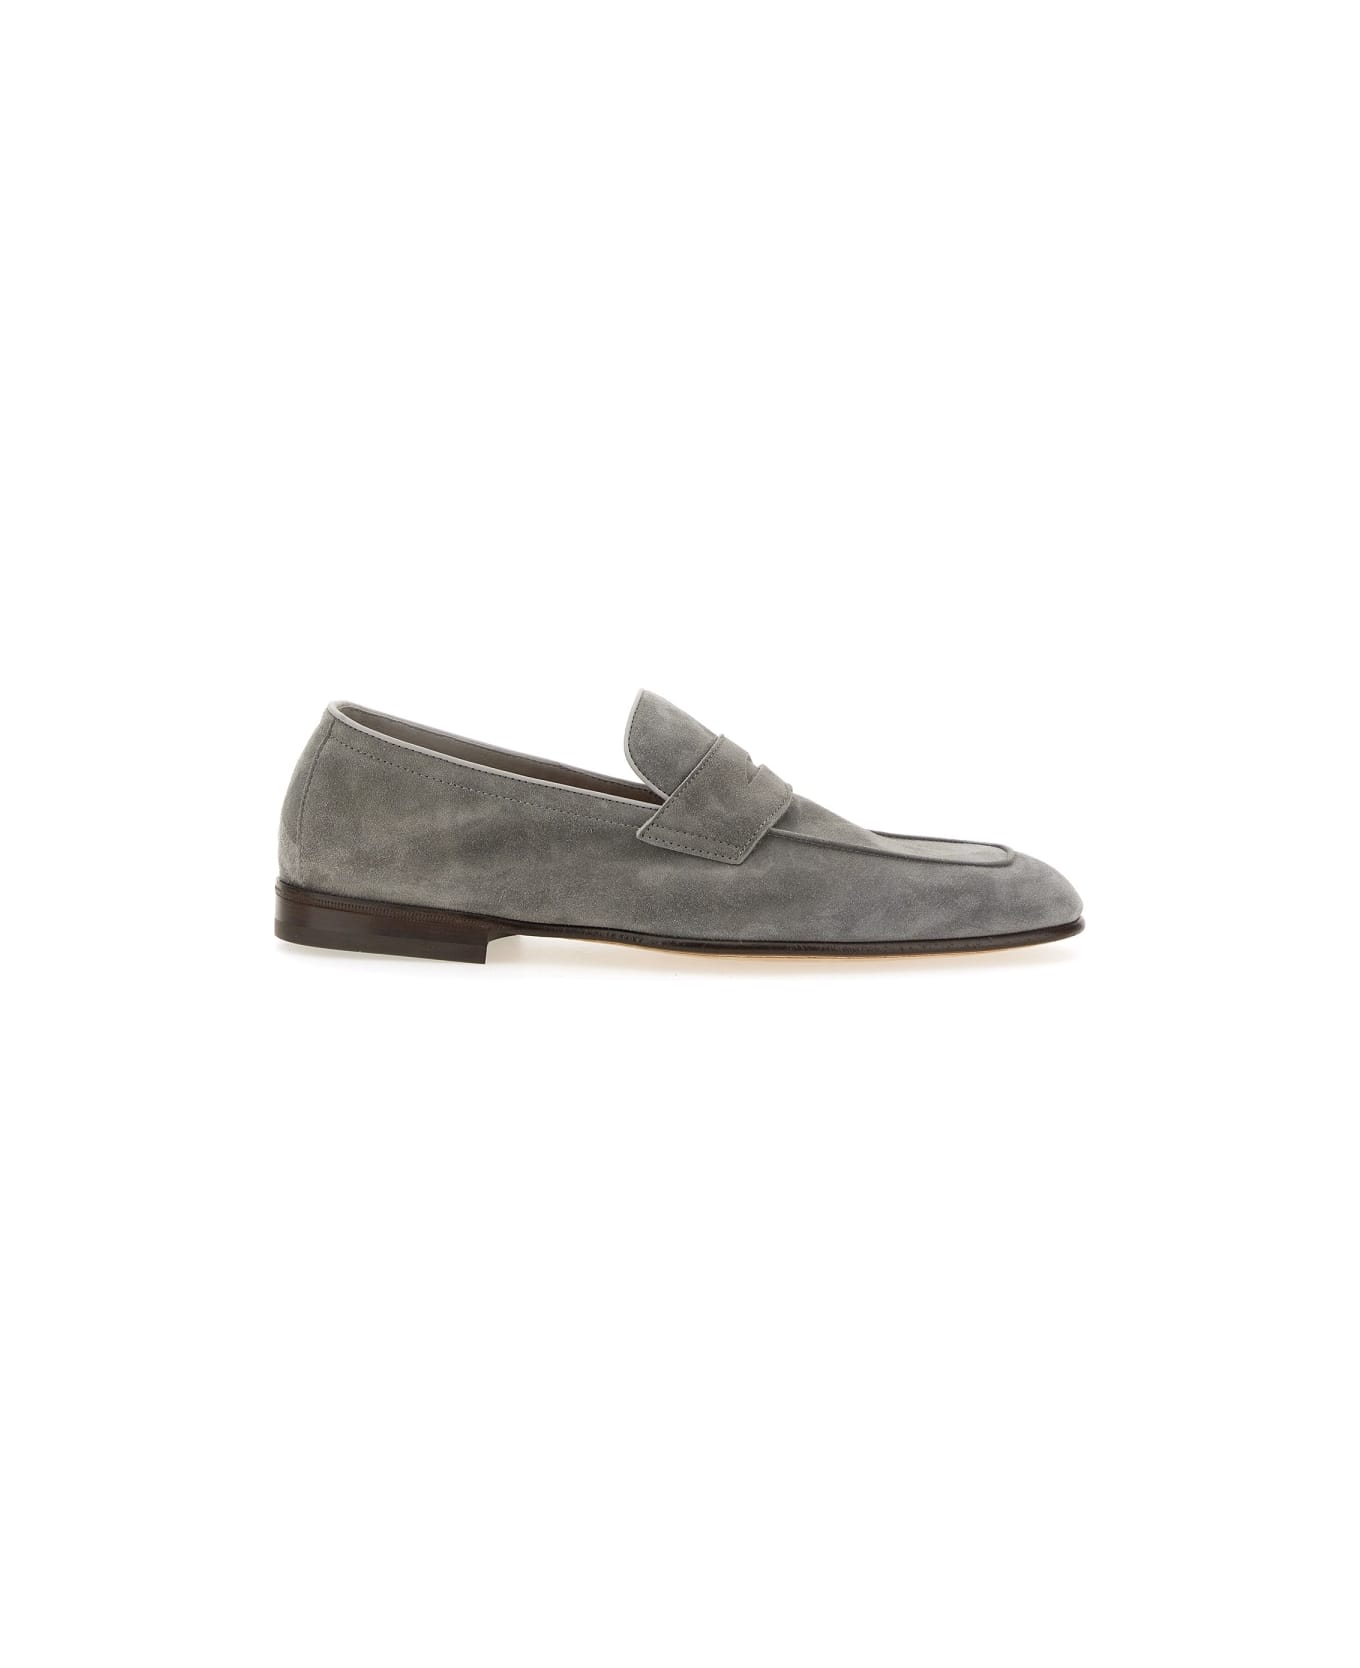 Brunello Cucinelli Penny Loafer - GREY